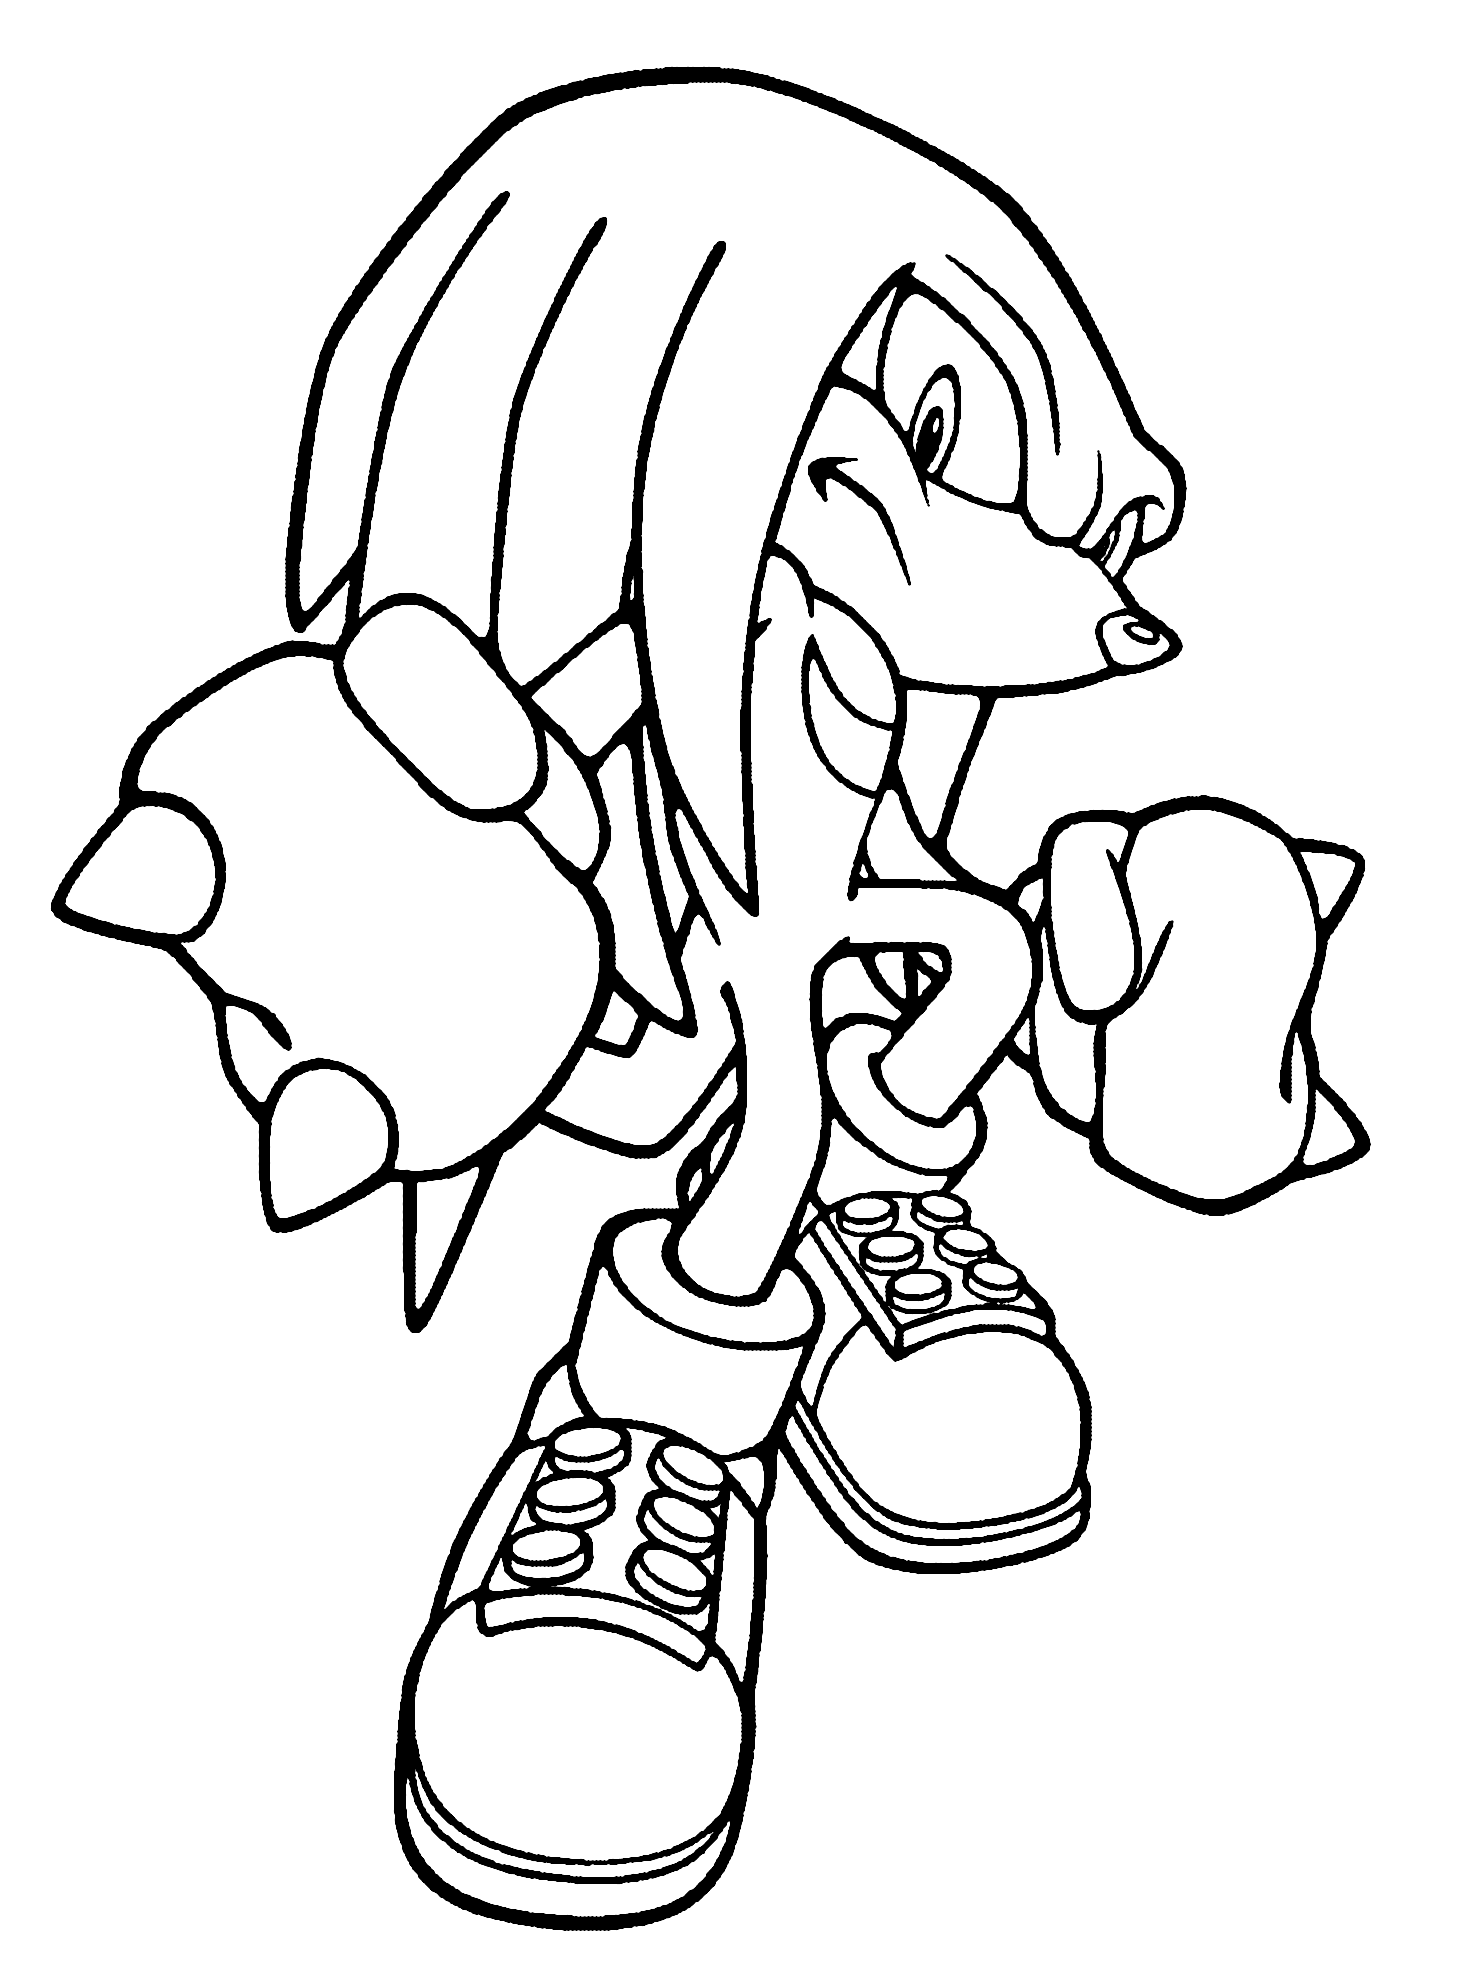 Knuckles Sonic coloring page